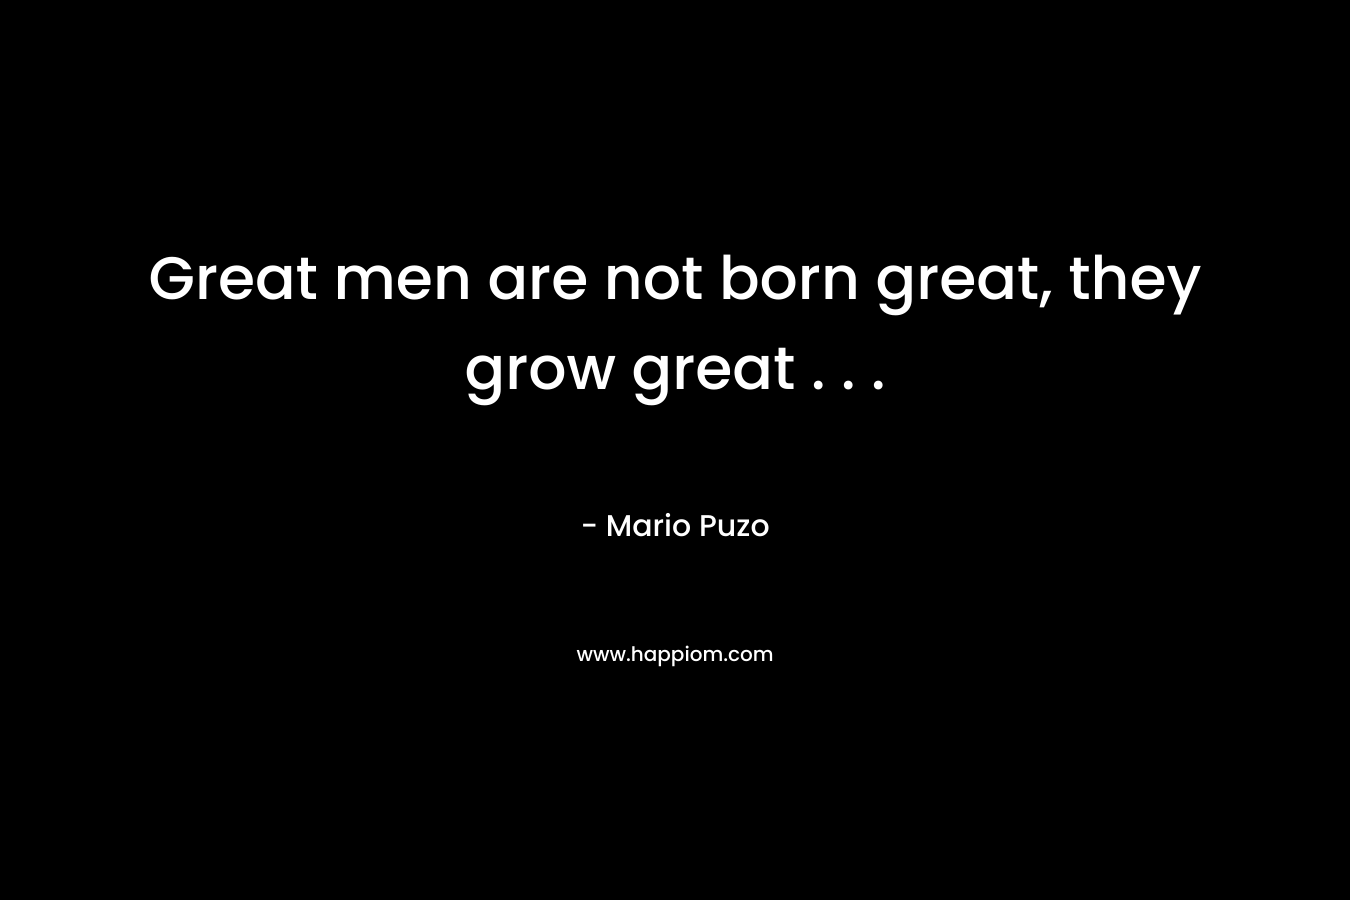 Great men are not born great, they grow great . . .